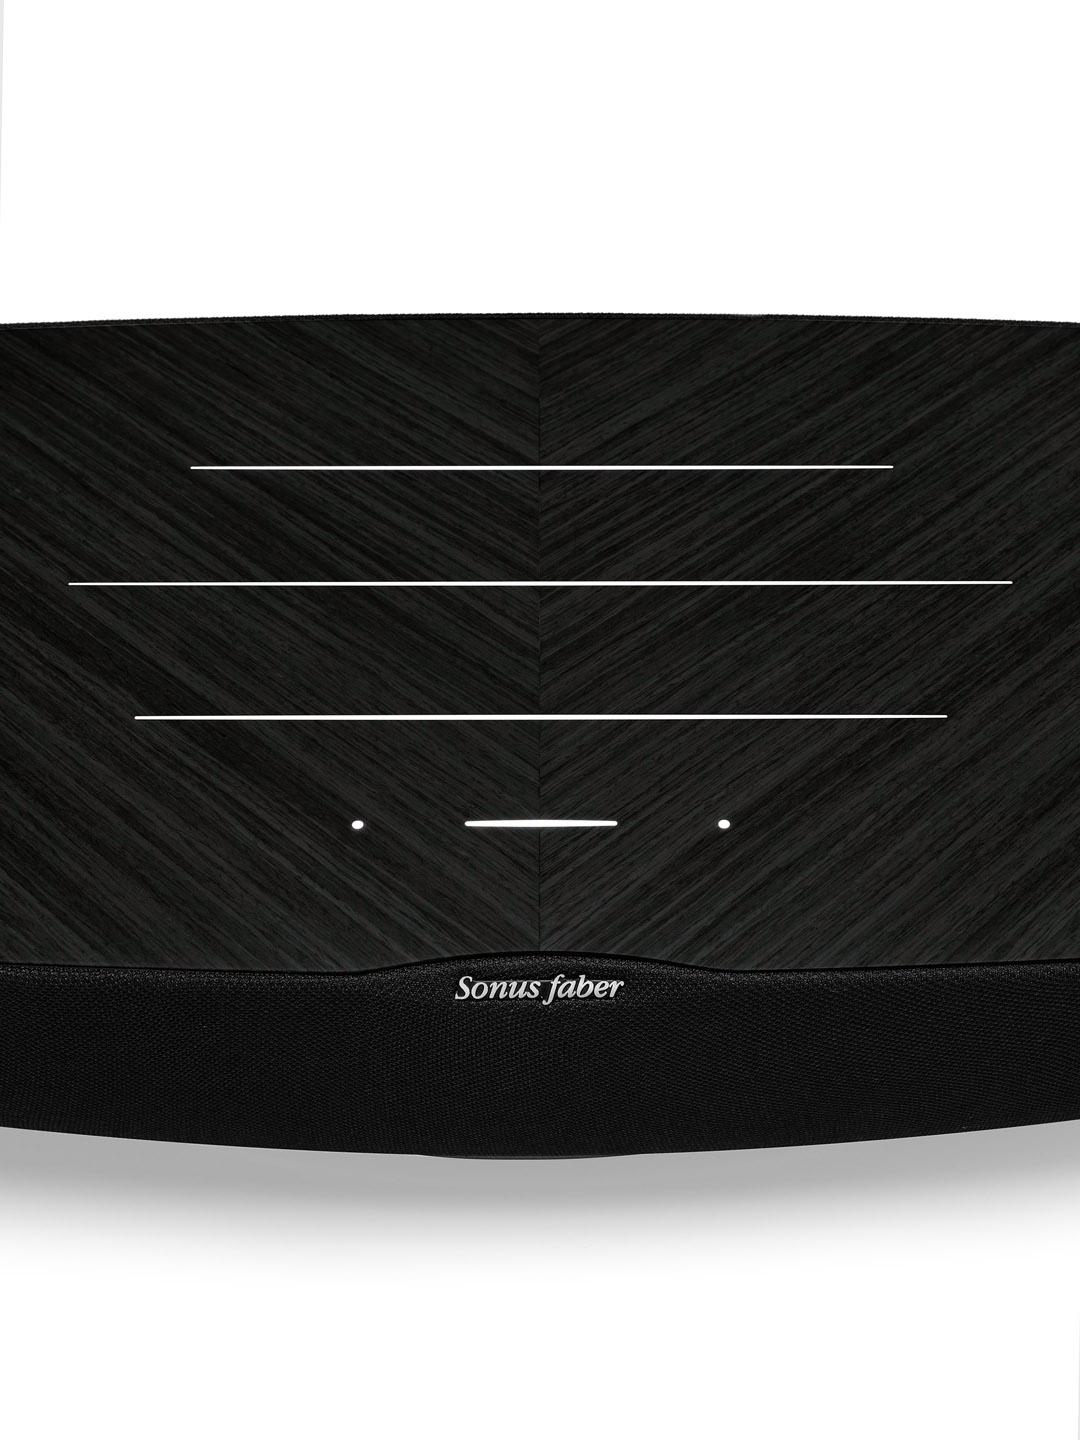 An unexpected and excellent surprise from Sonus faber. Omnia does a lot and does it stylishly. 40e54a6a light 1 graphite